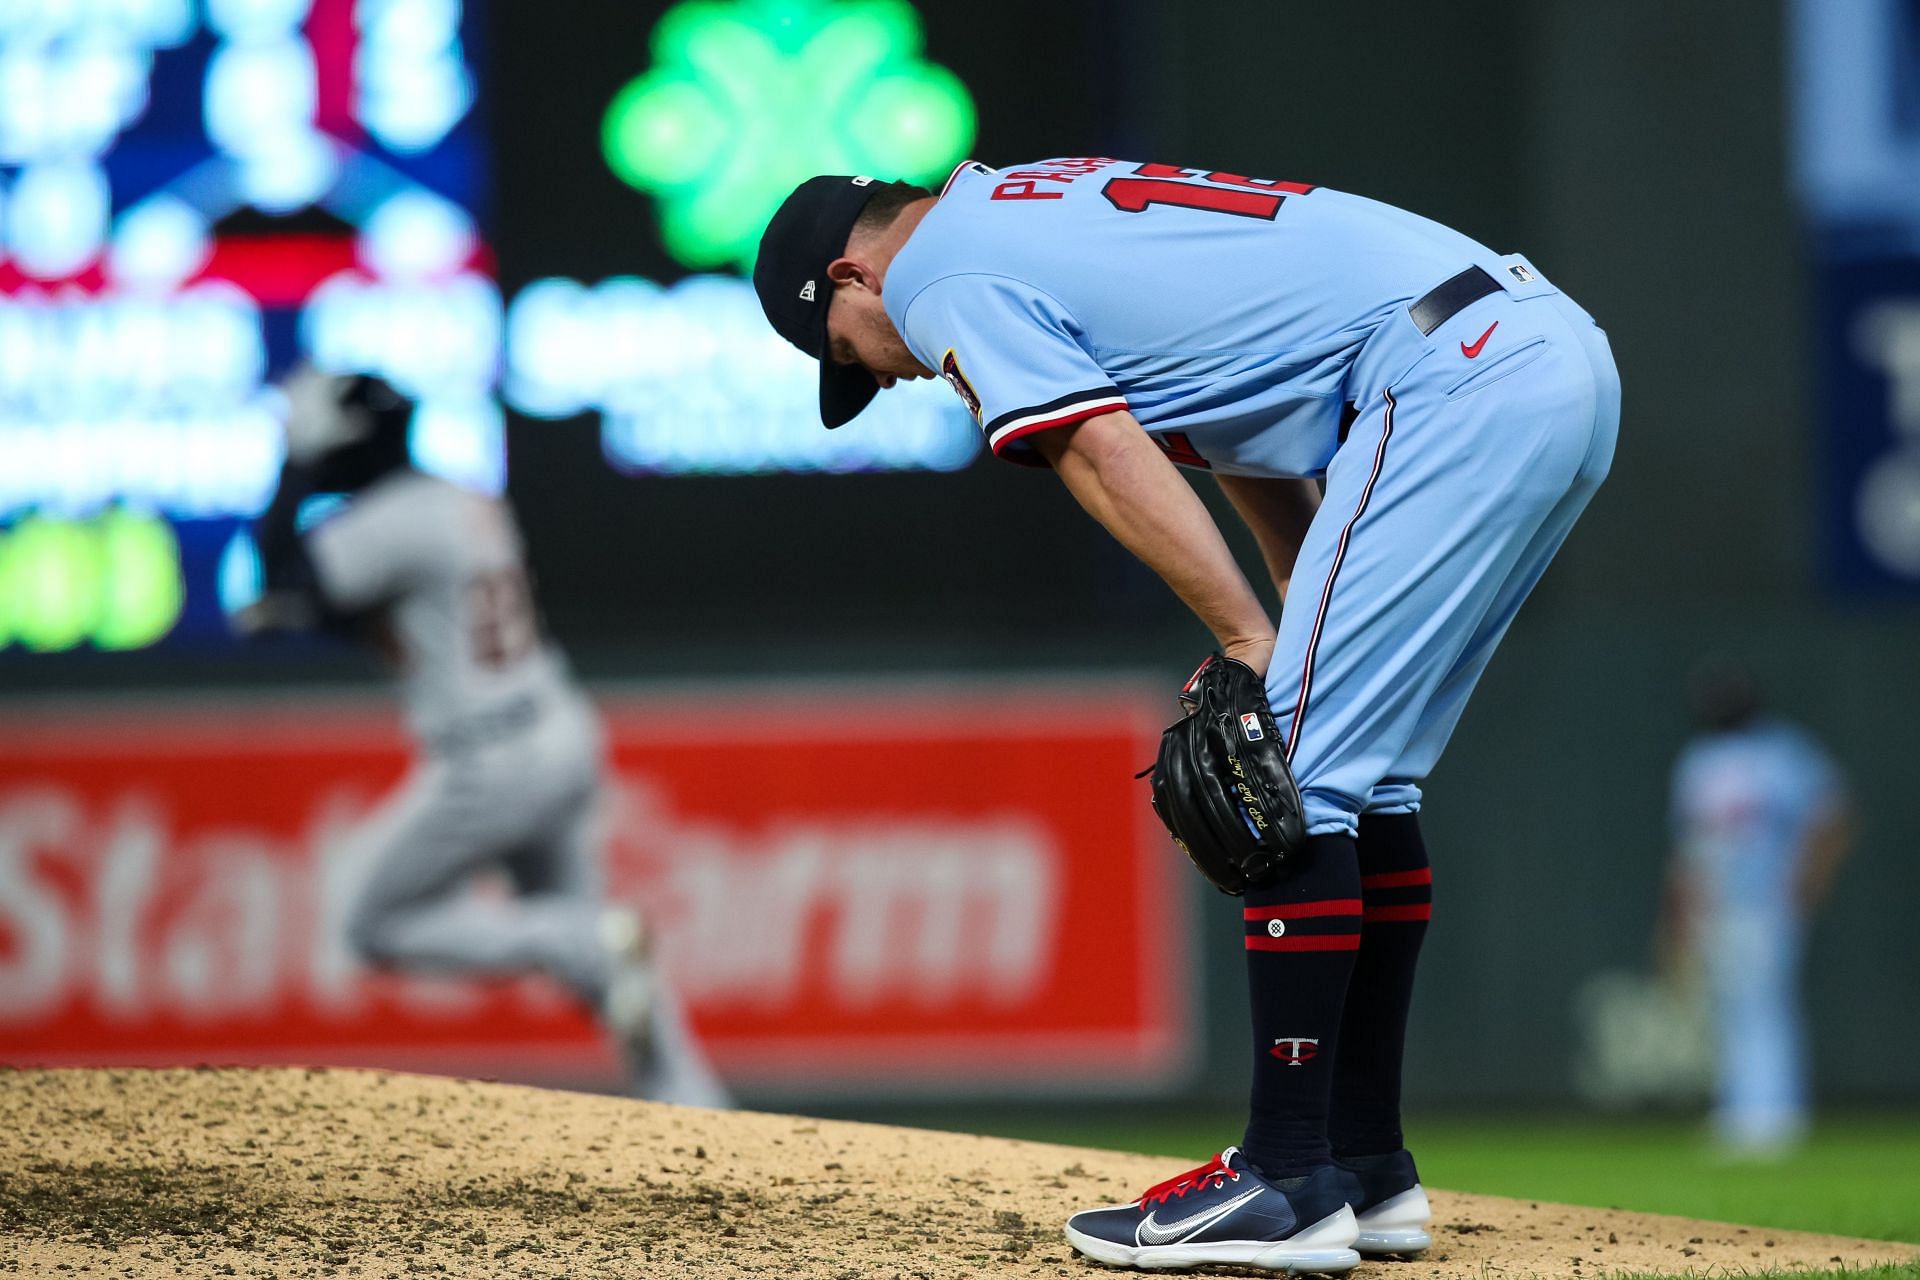 The Minnesota Twins are on the verge of being swept by the Houston Astros